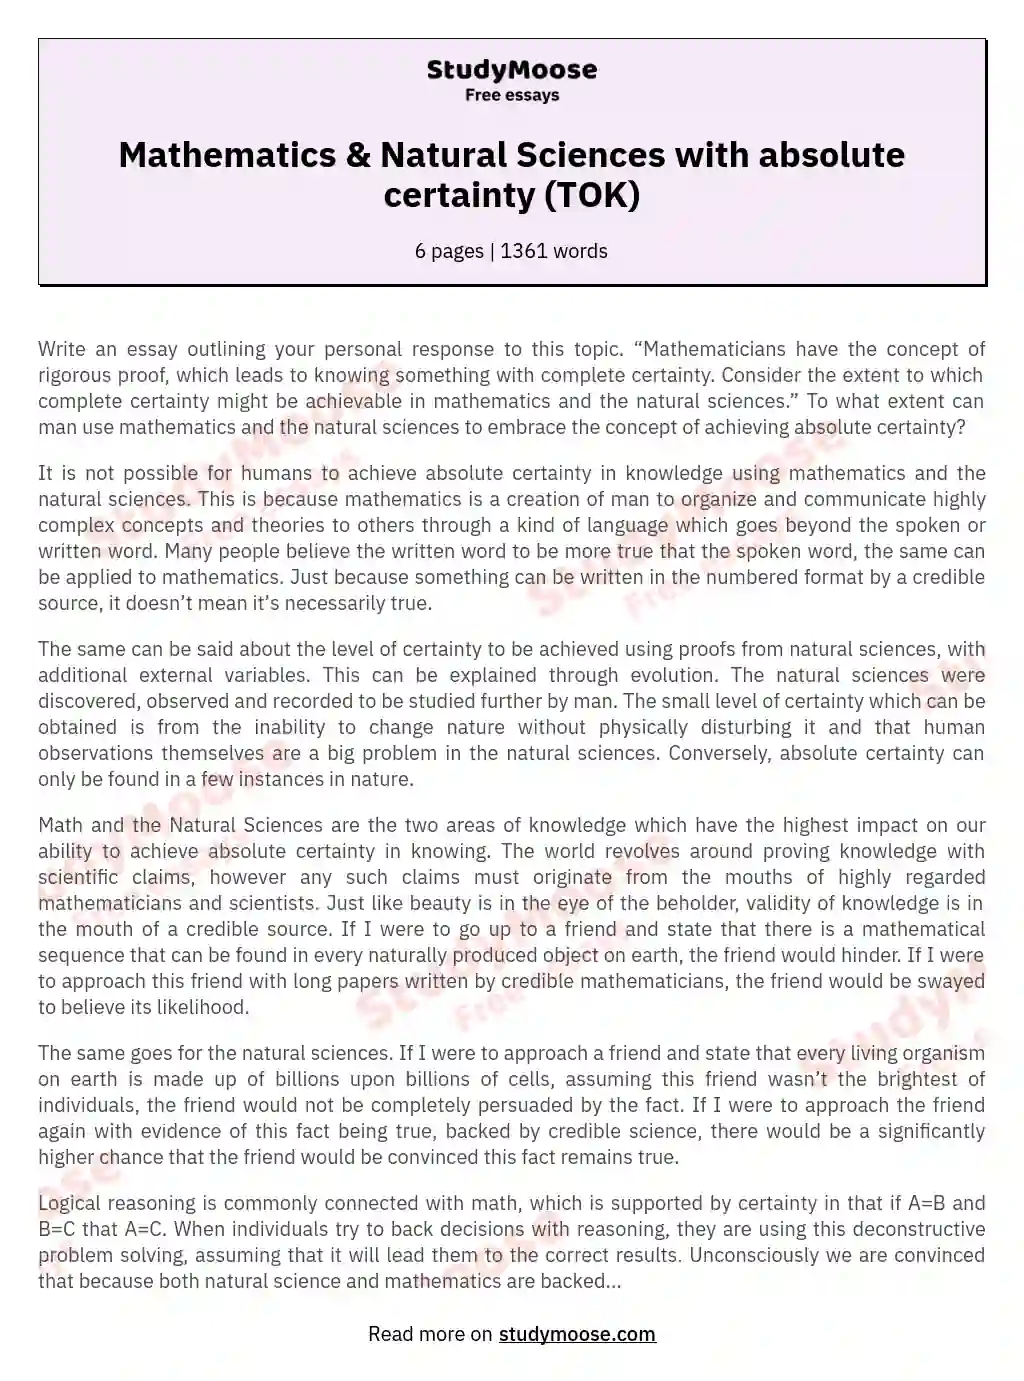 Mathematics & Natural Sciences with absolute certainty (TOK)